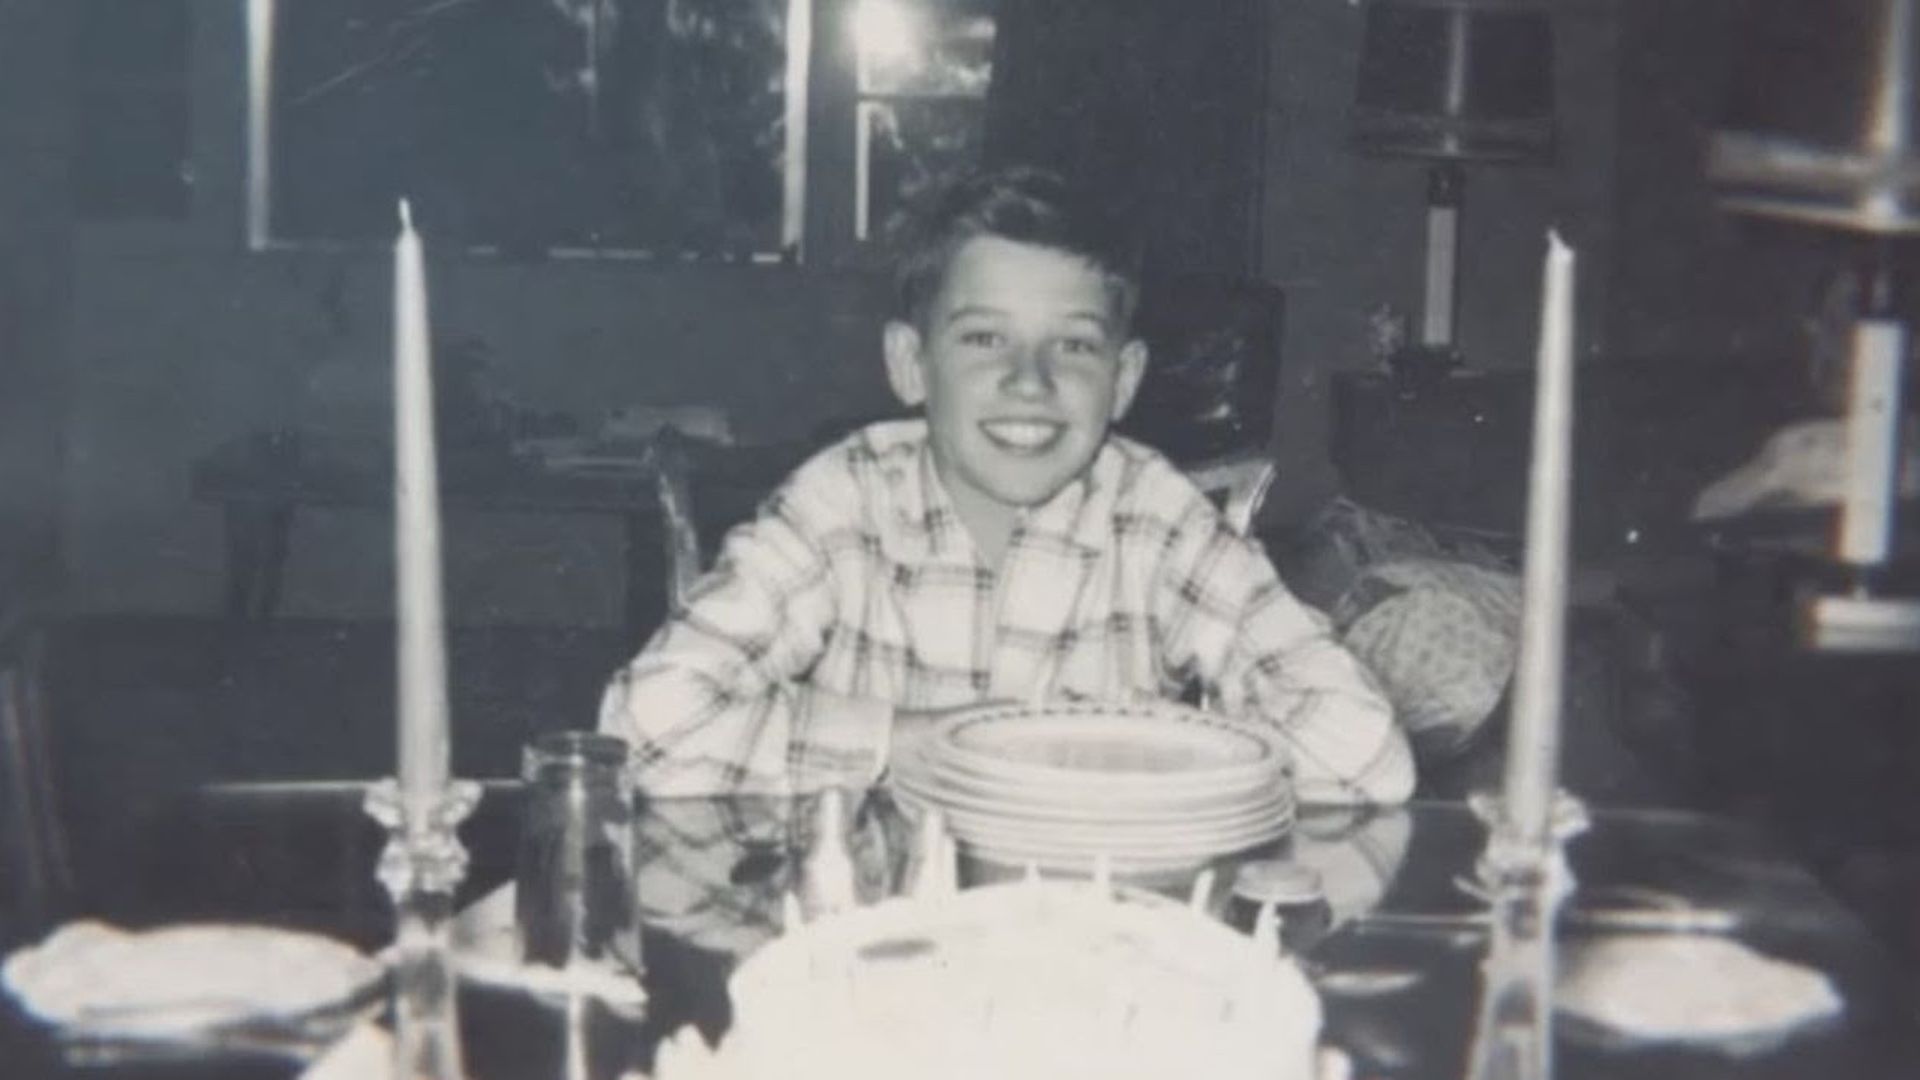 A young Joe Biden smiling at a dinner table 